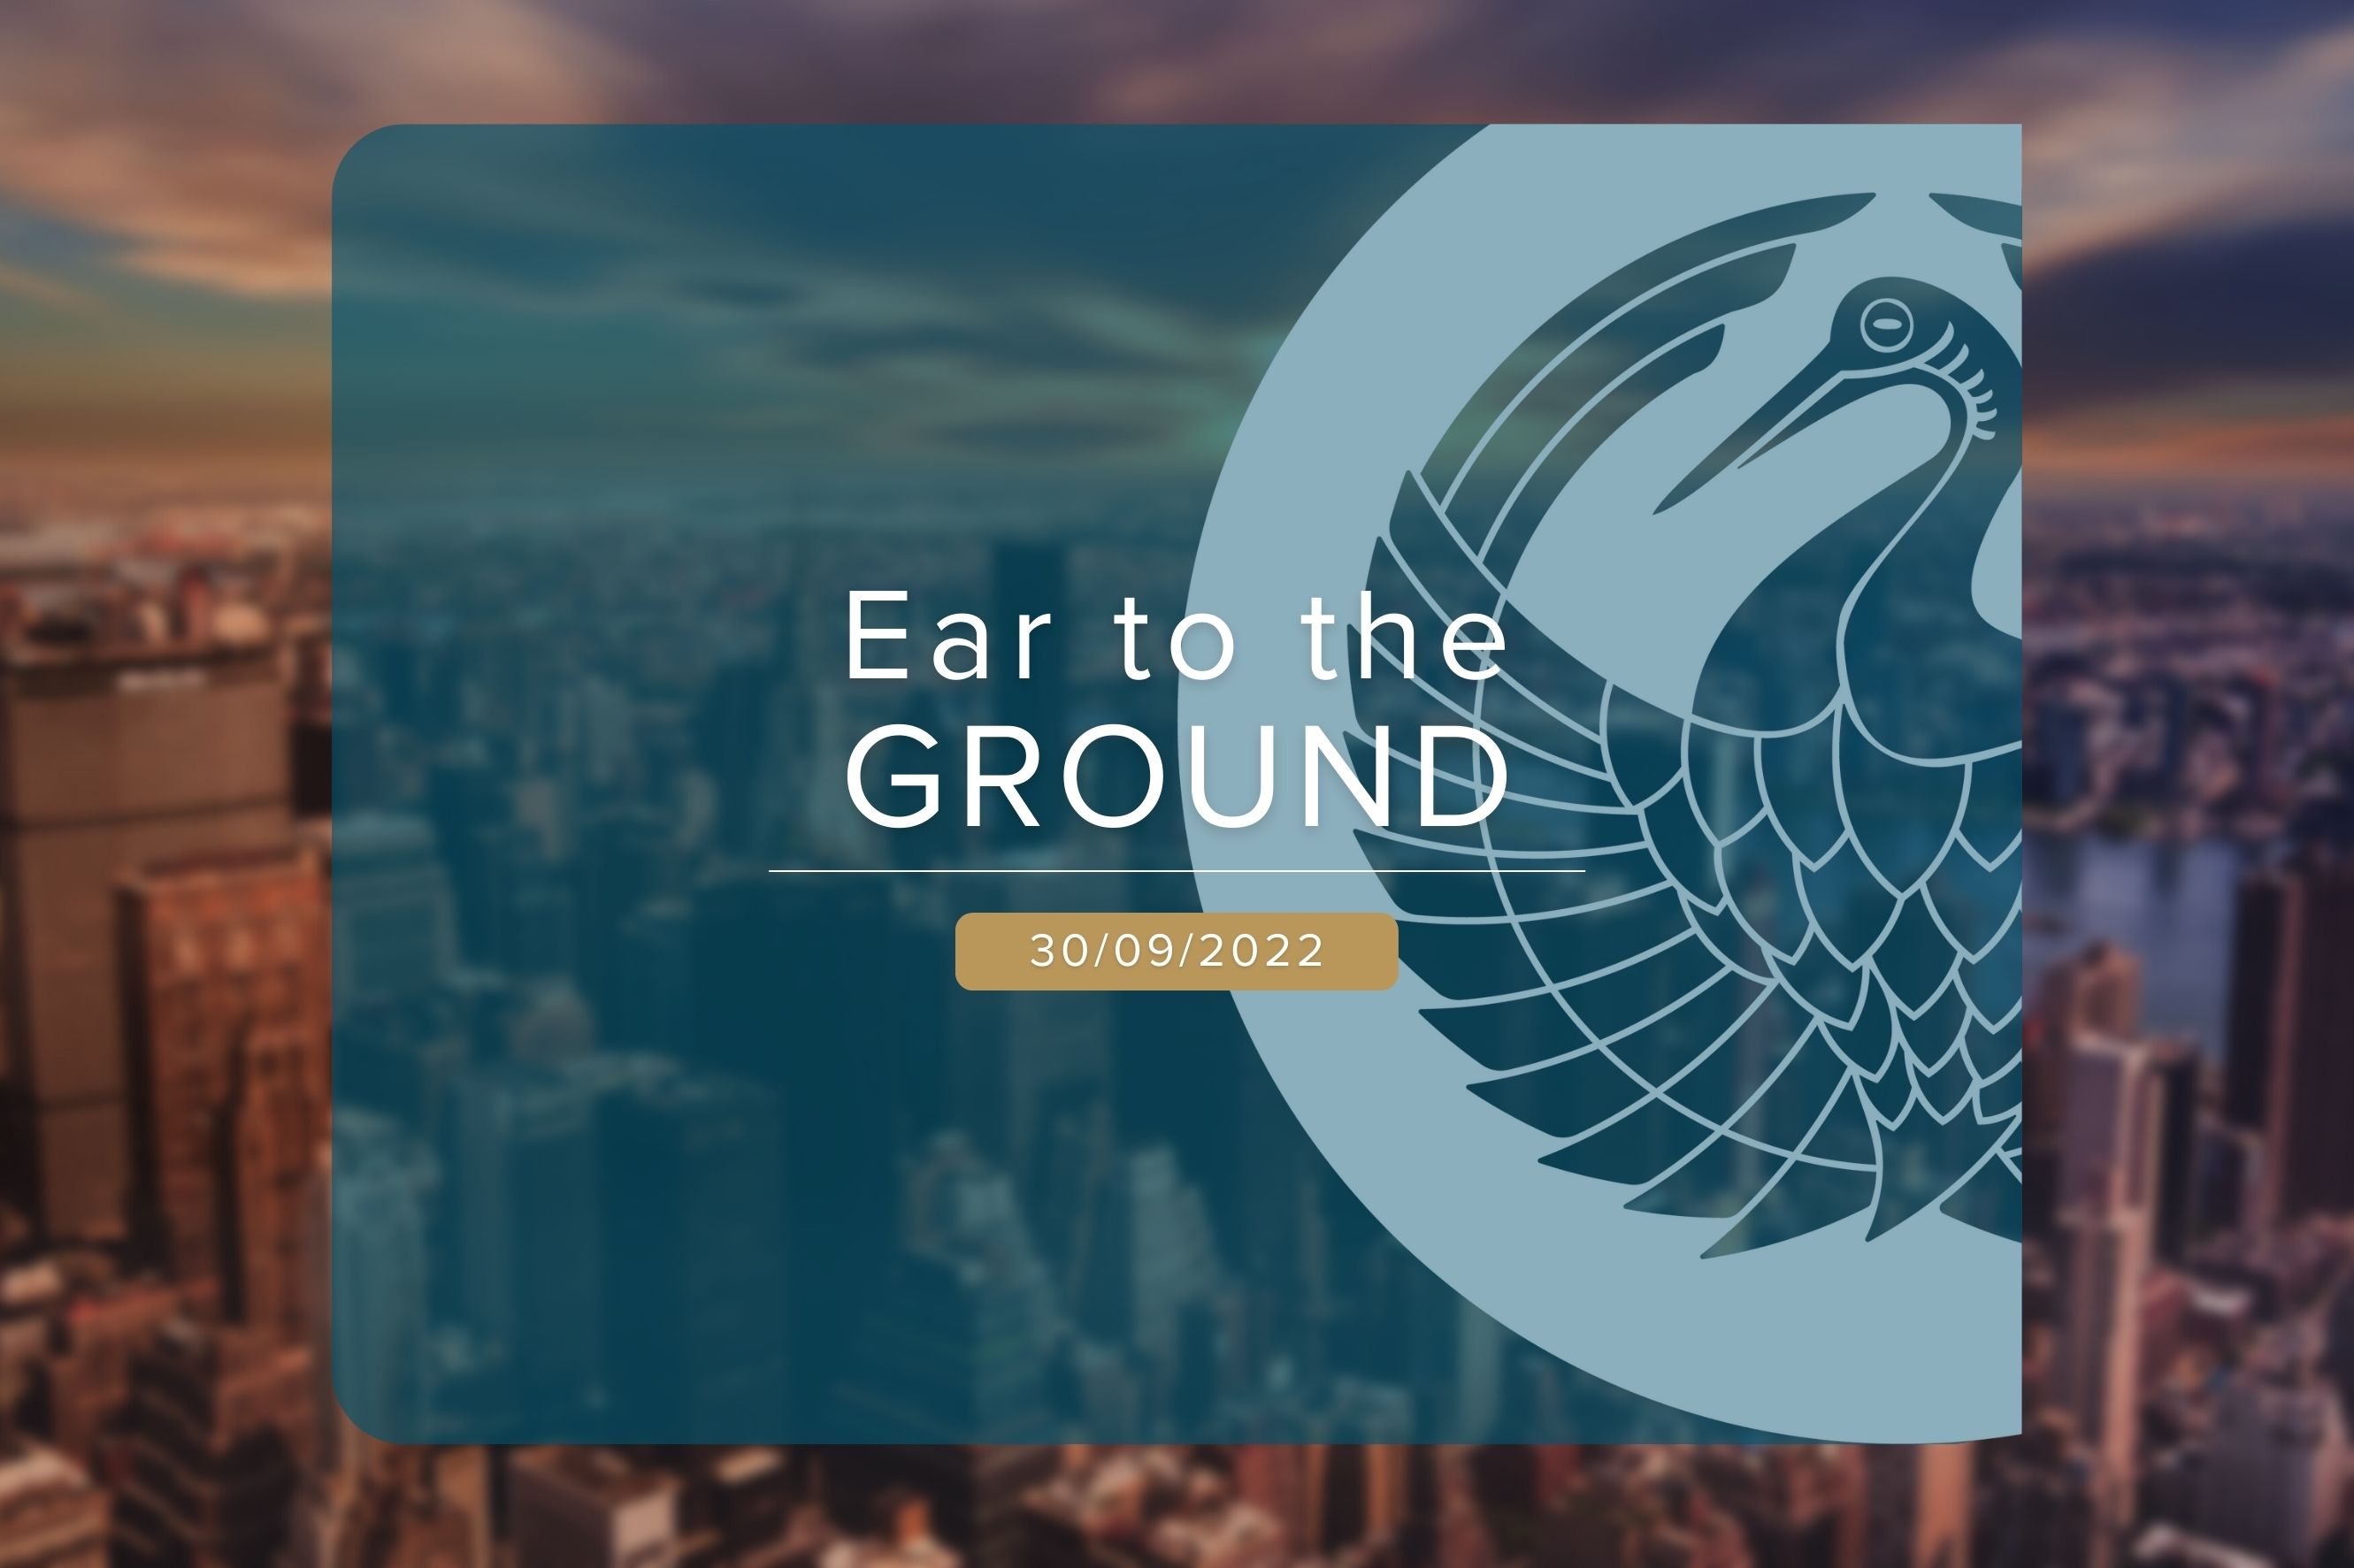 Ear to the ground 30/09/22